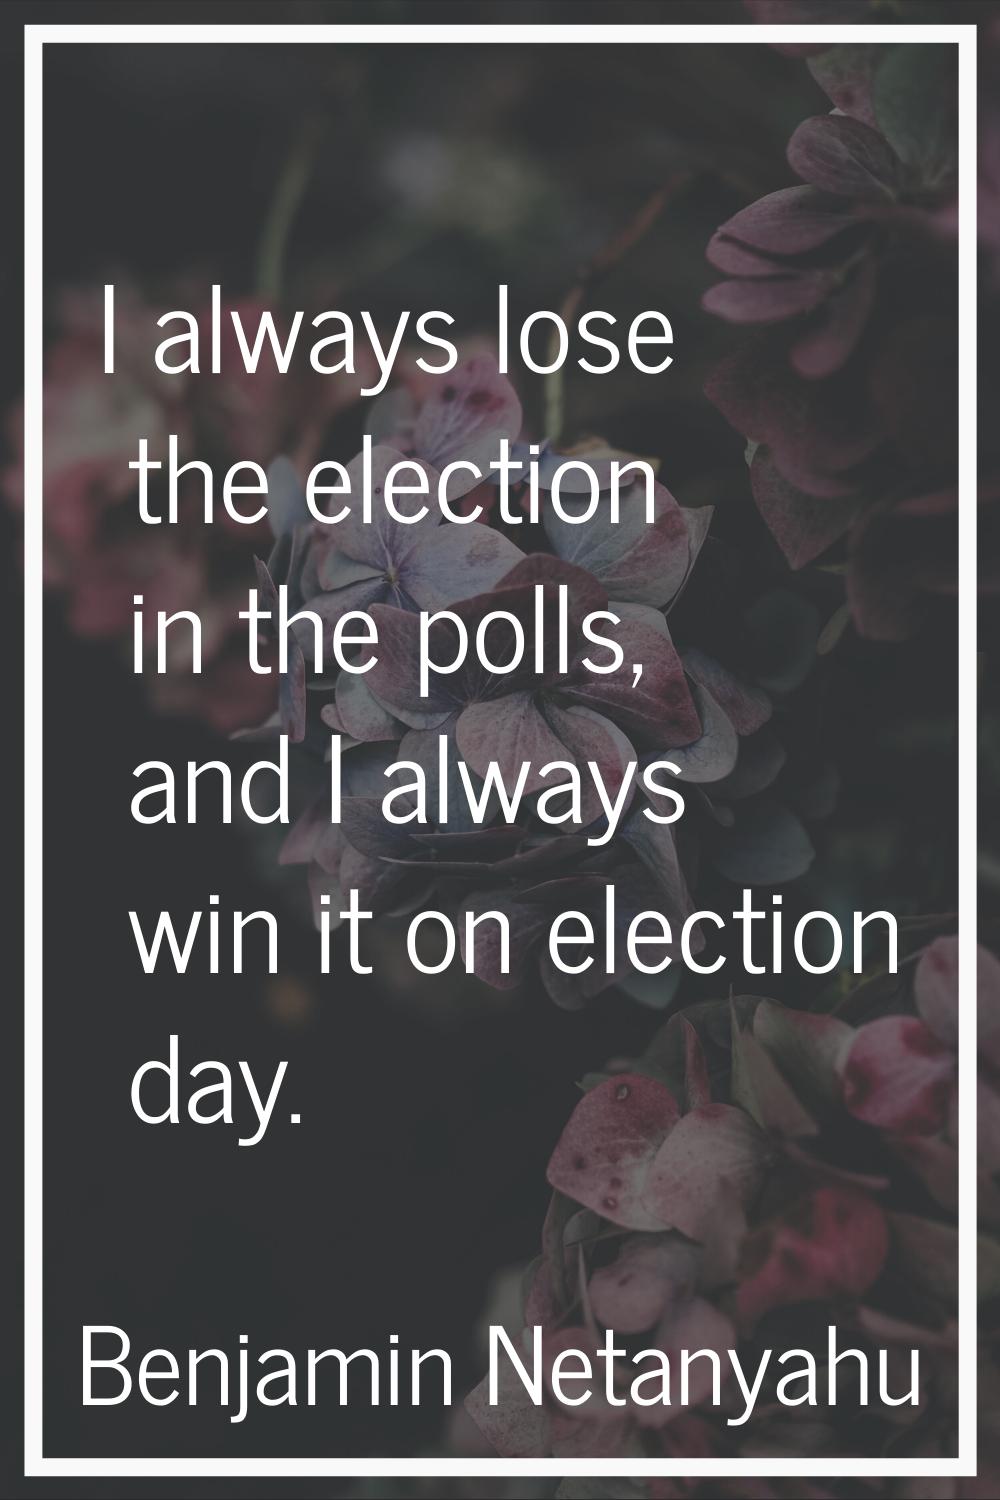 I always lose the election in the polls, and I always win it on election day.